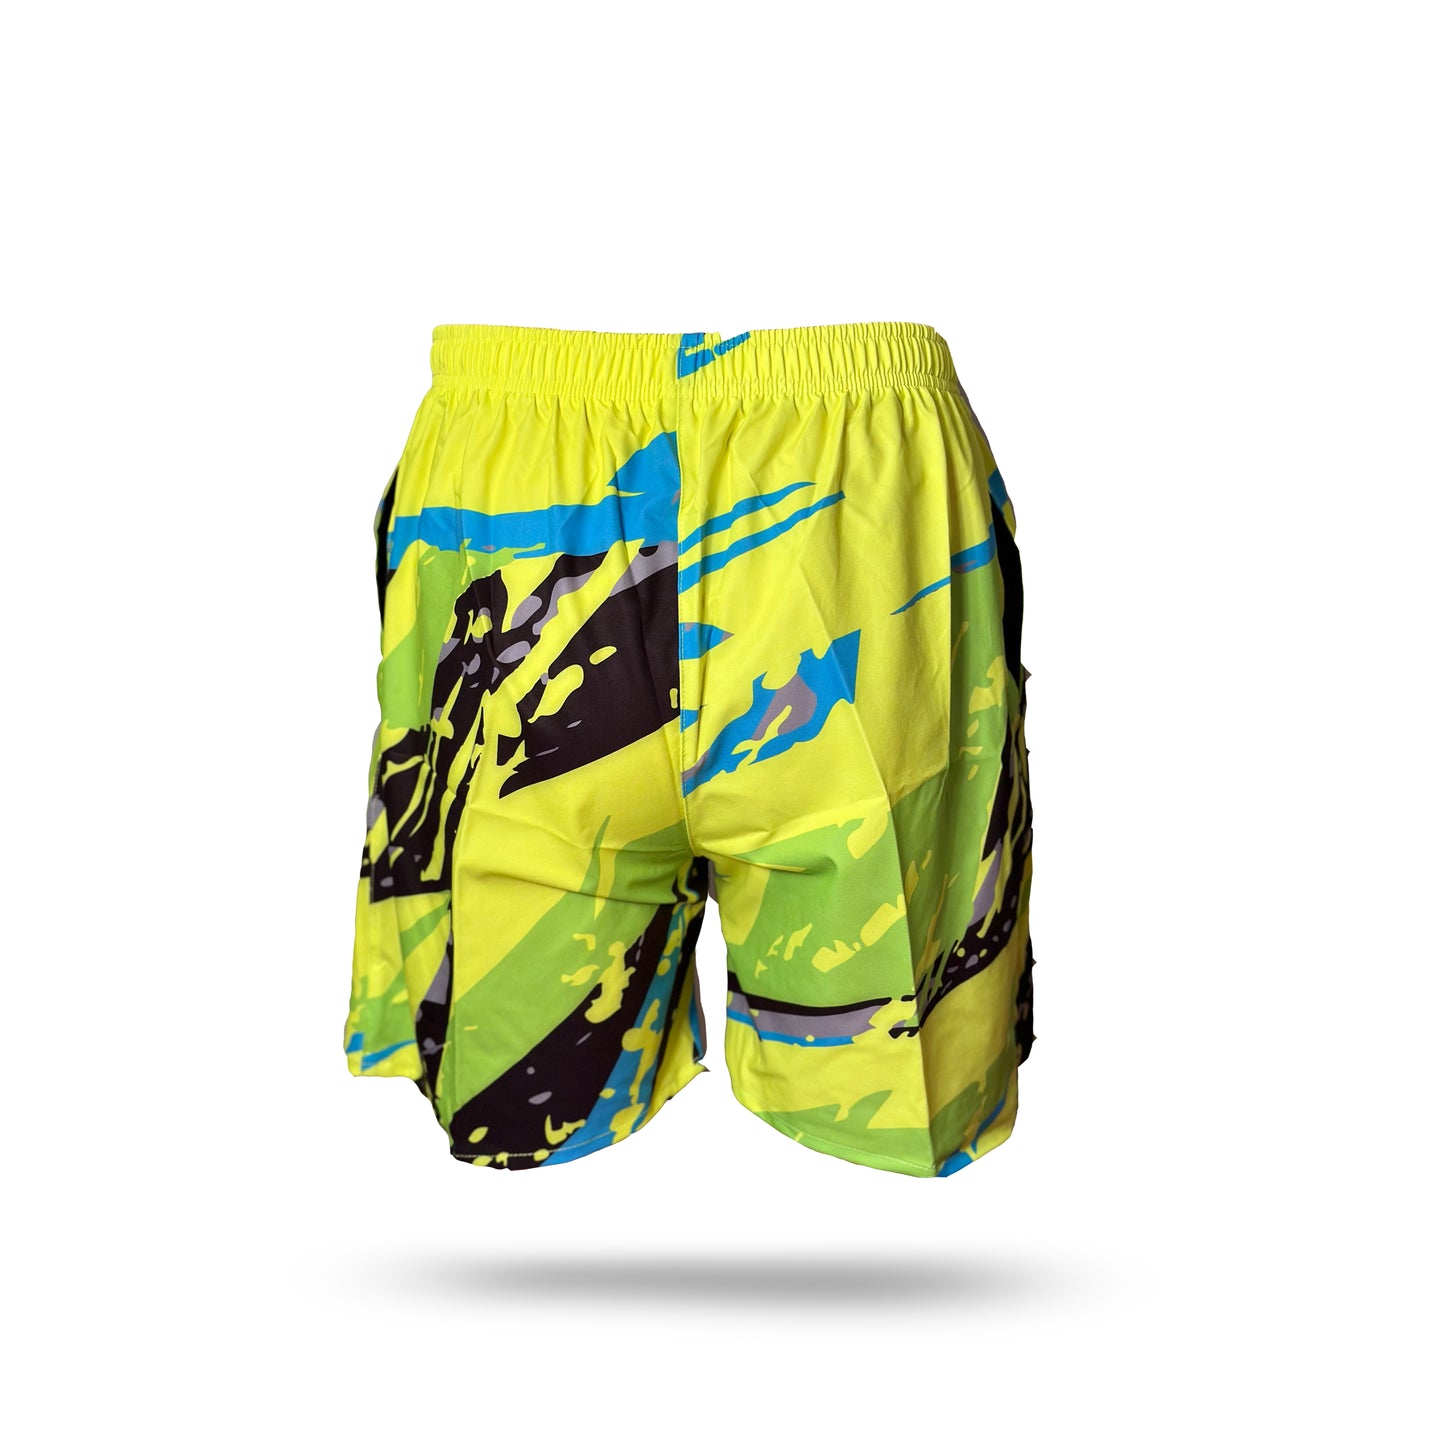 Rinkster Shorts - Fluo Edition